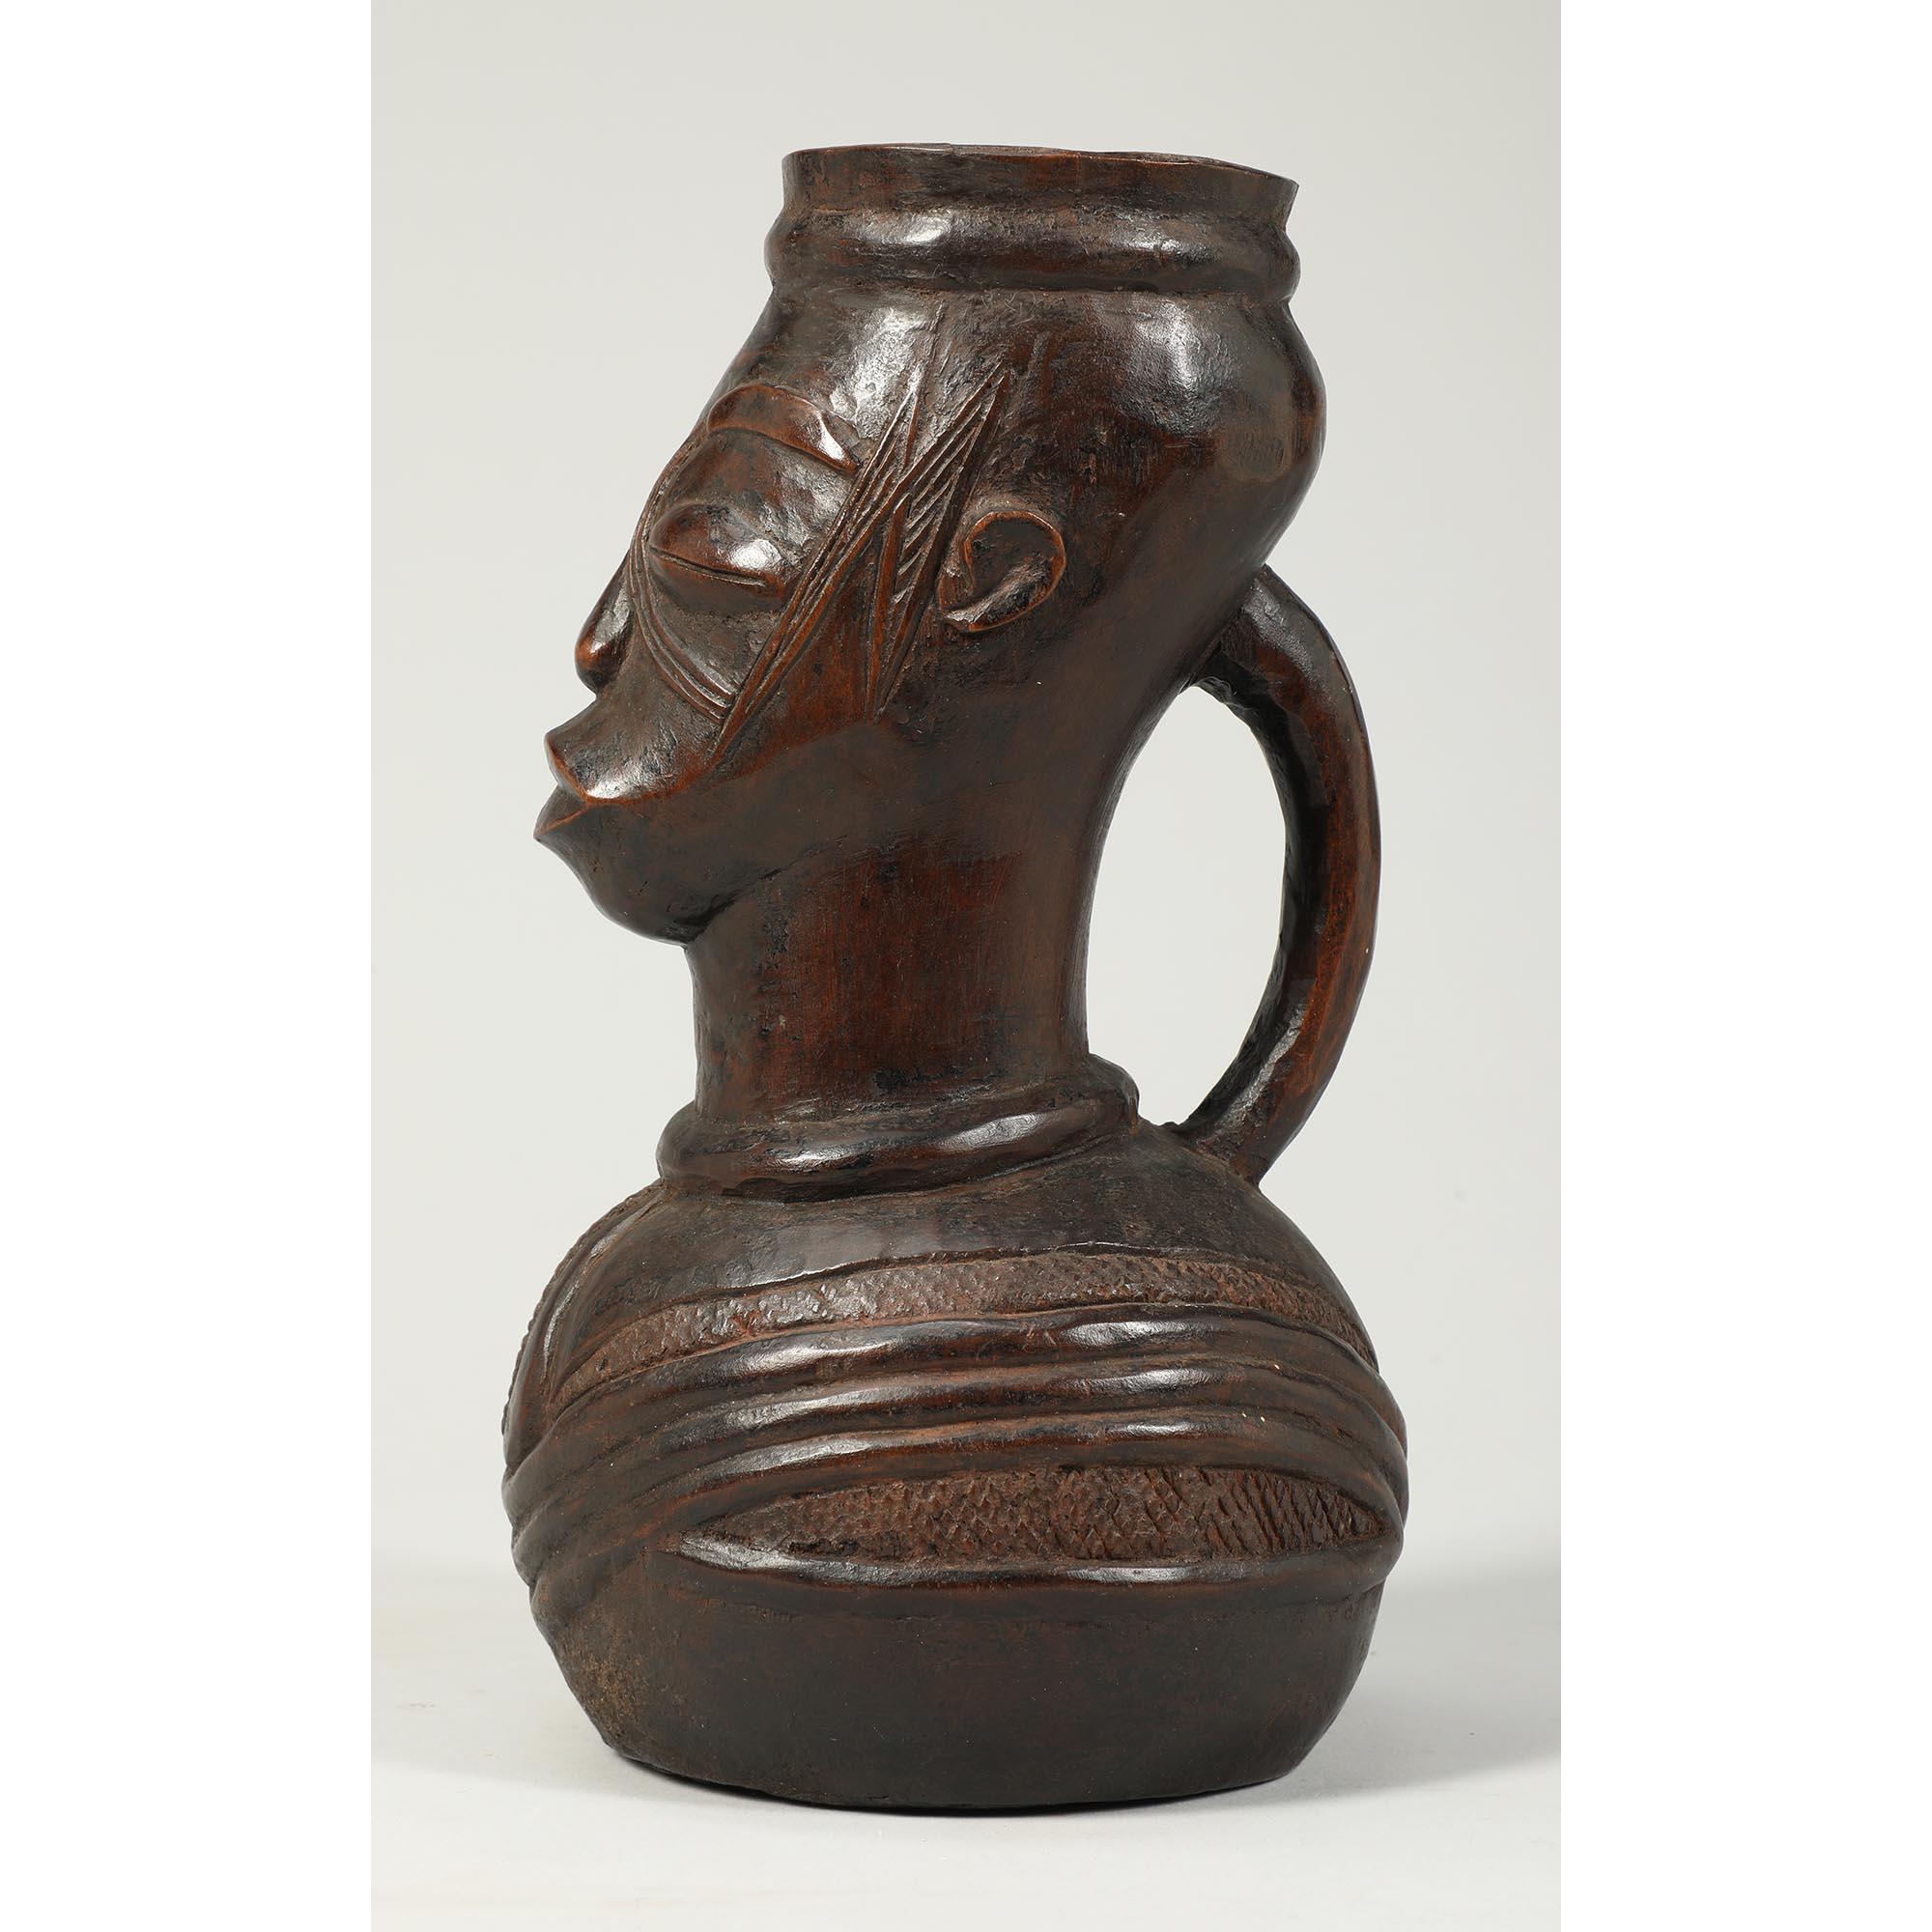 Congolese Early Carved Wood Tribal Mangbetu Ritual Vessel Pitcher Congo Africa Provenance For Sale